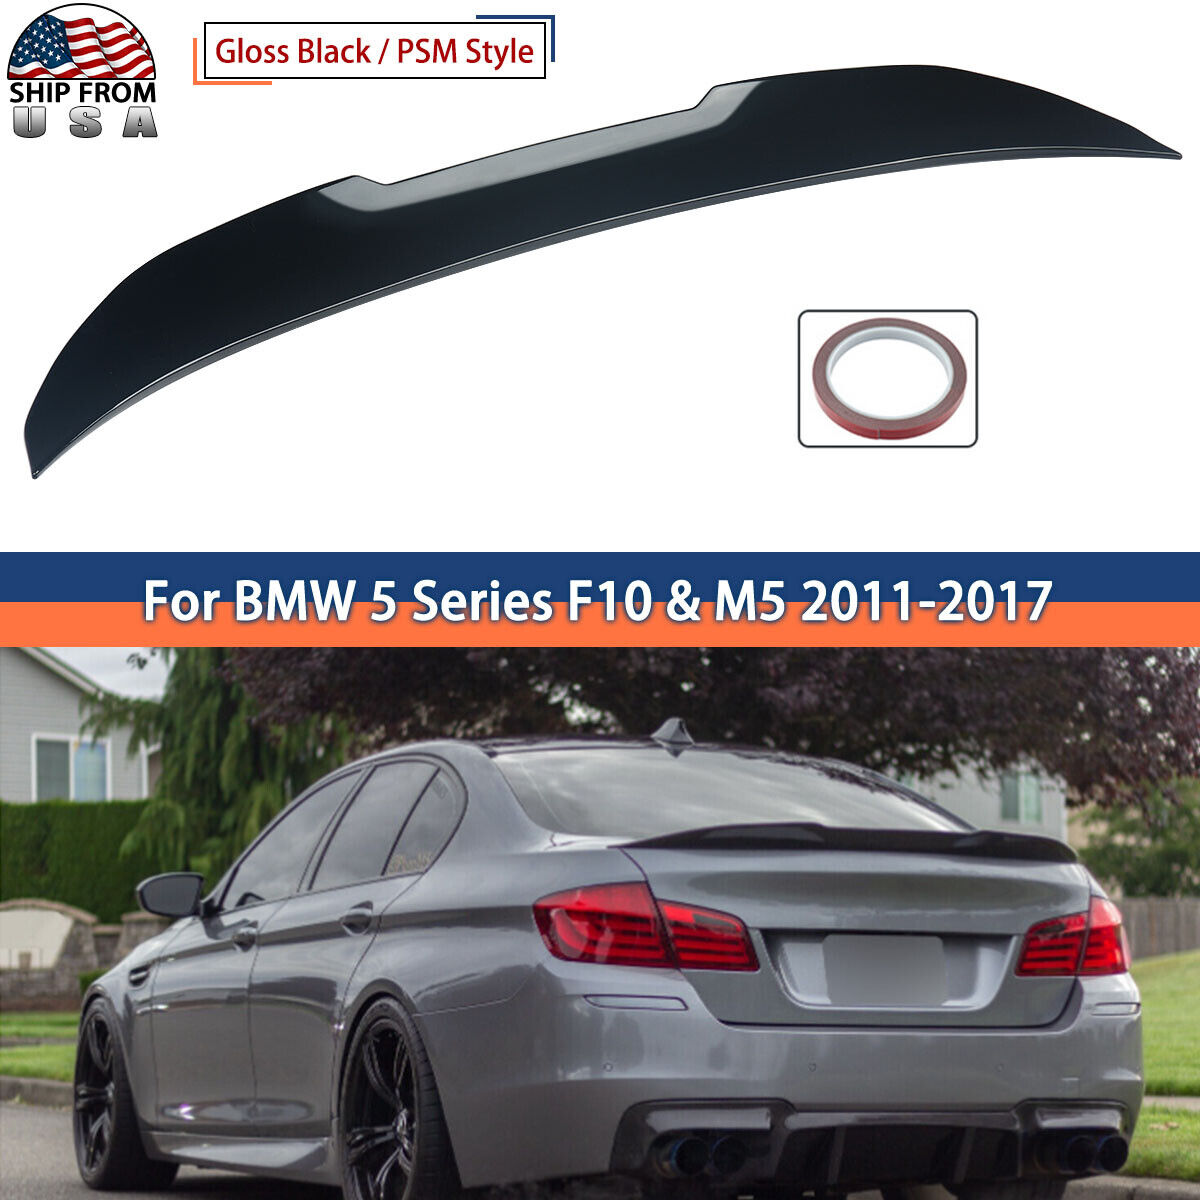 For 11-17 BMW 5 Series F10 F18 528i 550i 535i Gloss Black PSM Style Rear Spoiler